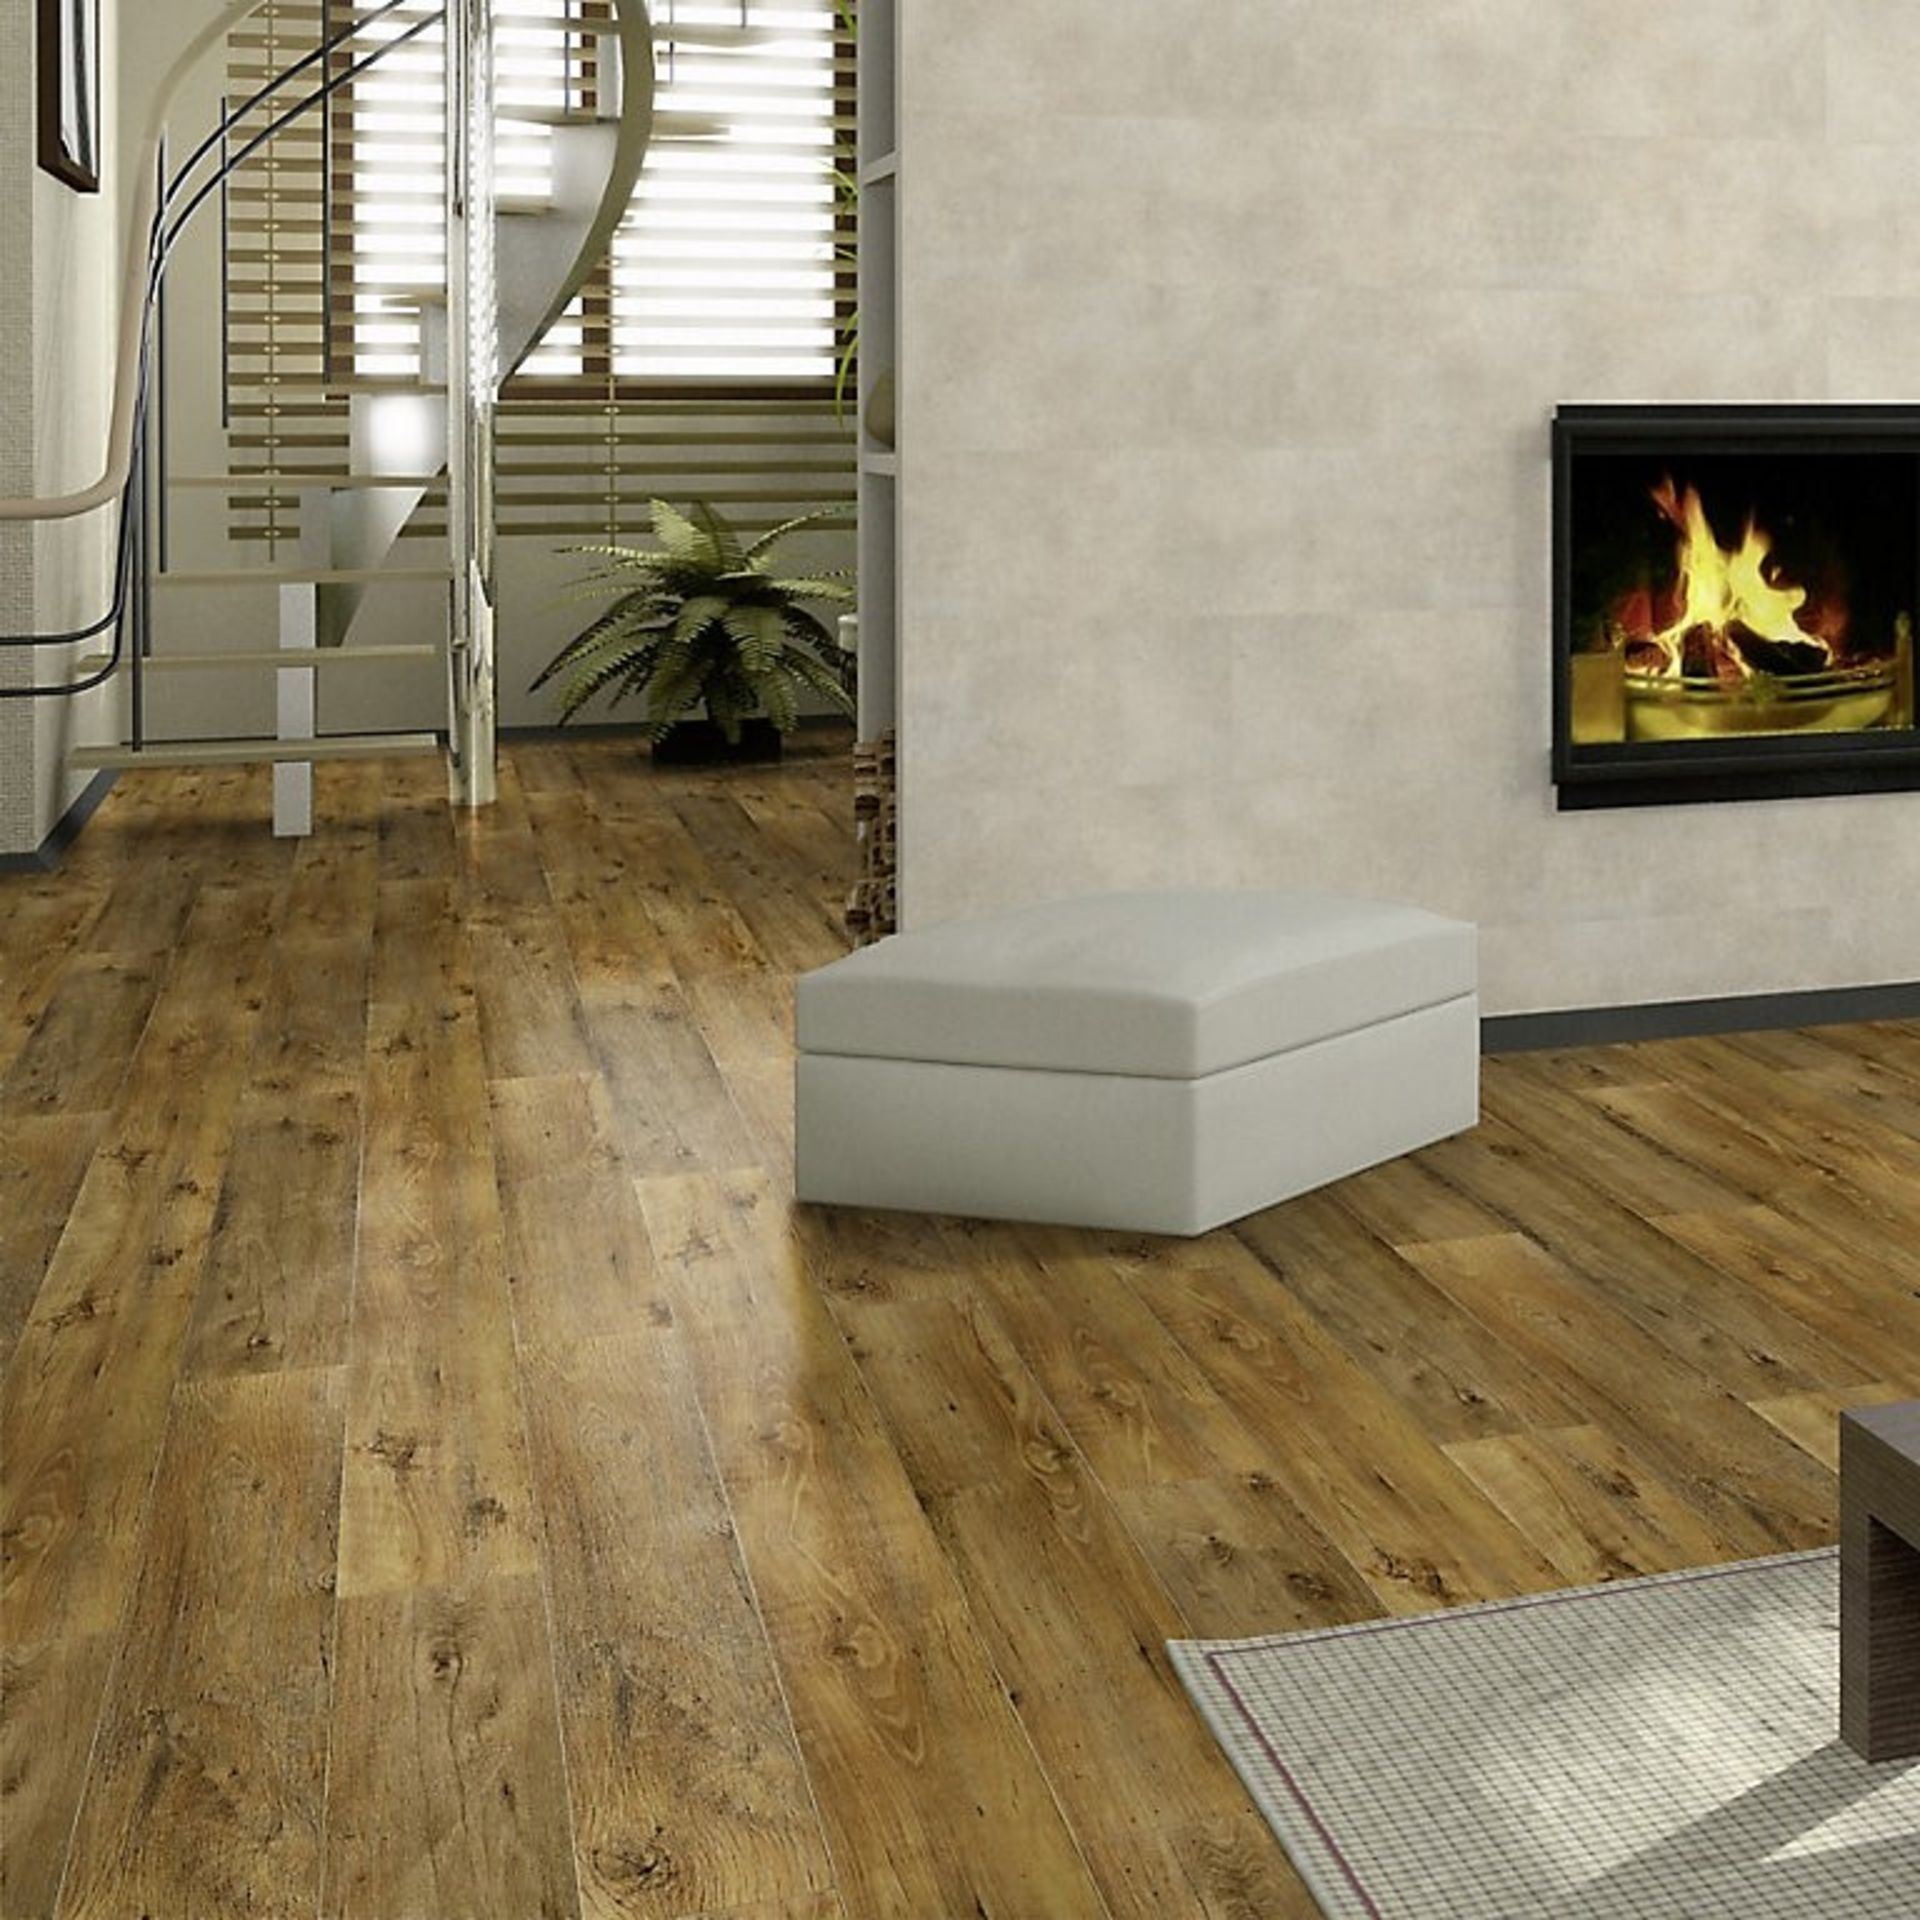 New 18.5m2 Arpeggio Tuscany Olive 2 Strip Effect Laminate Flooring. Drop Lick Fitting, 4 Sided ...